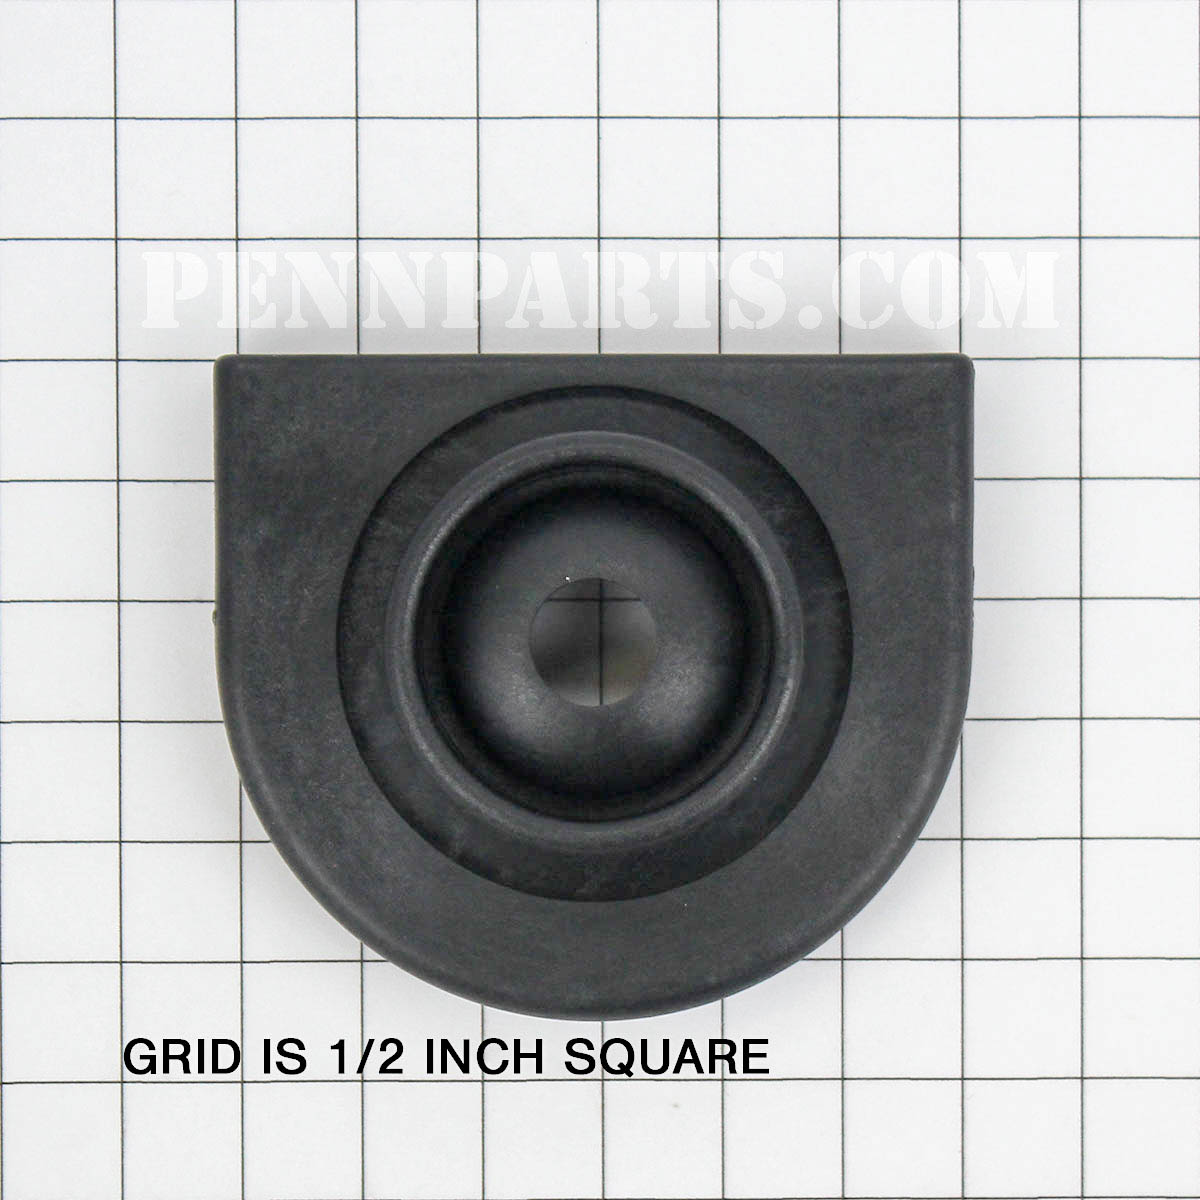 DSP-S62010 Frame Insert for the 132-600